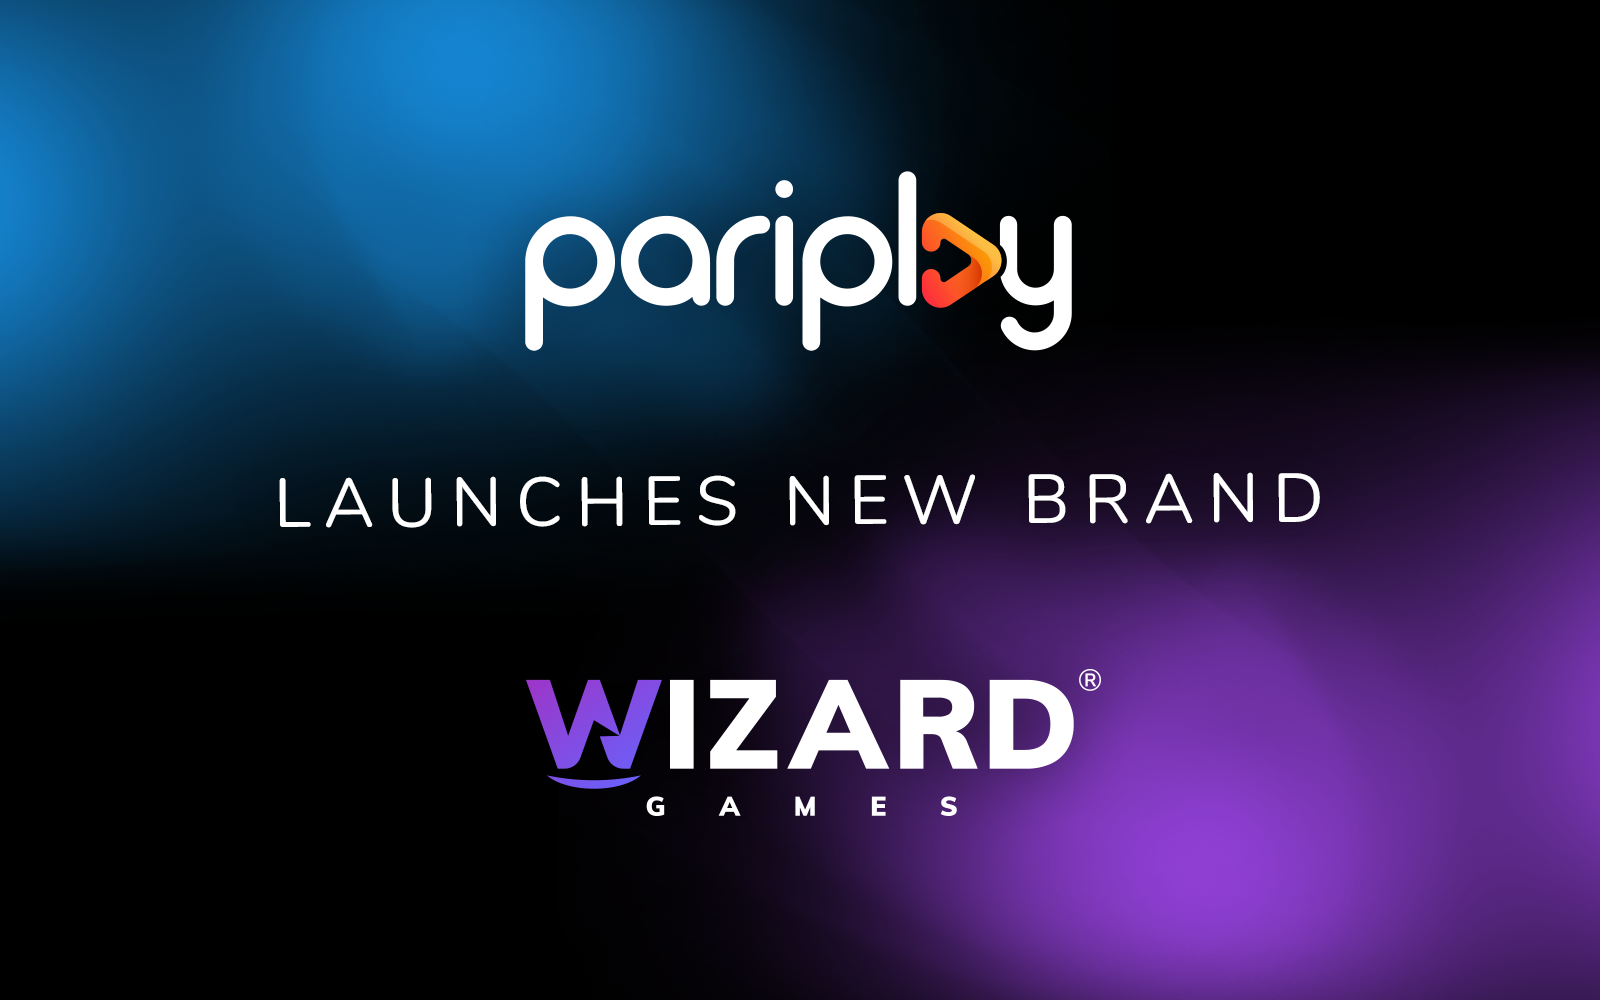 New Brand Wizard Games